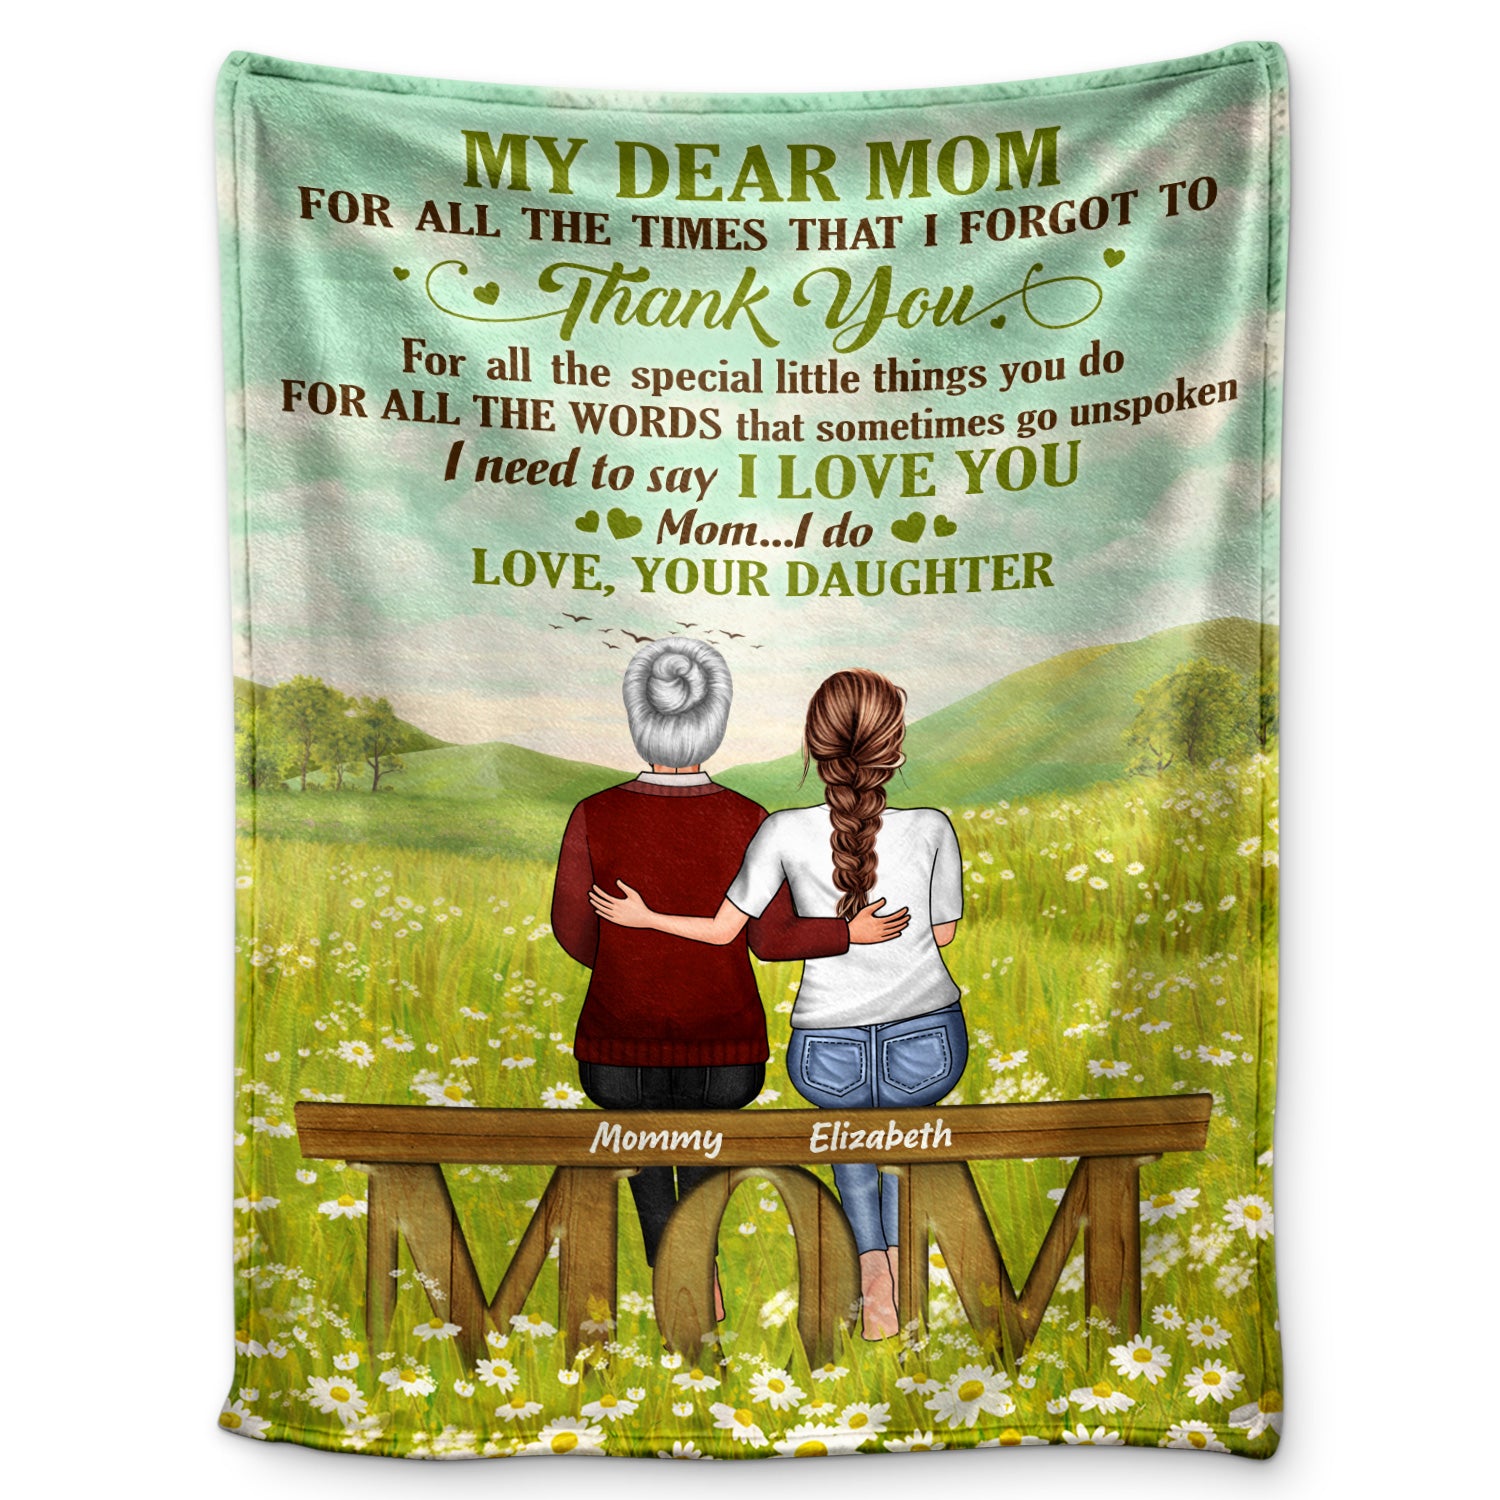 Dear My Mom I Need To Say I Love You - Mother Gift - Personalized Custom Blanket